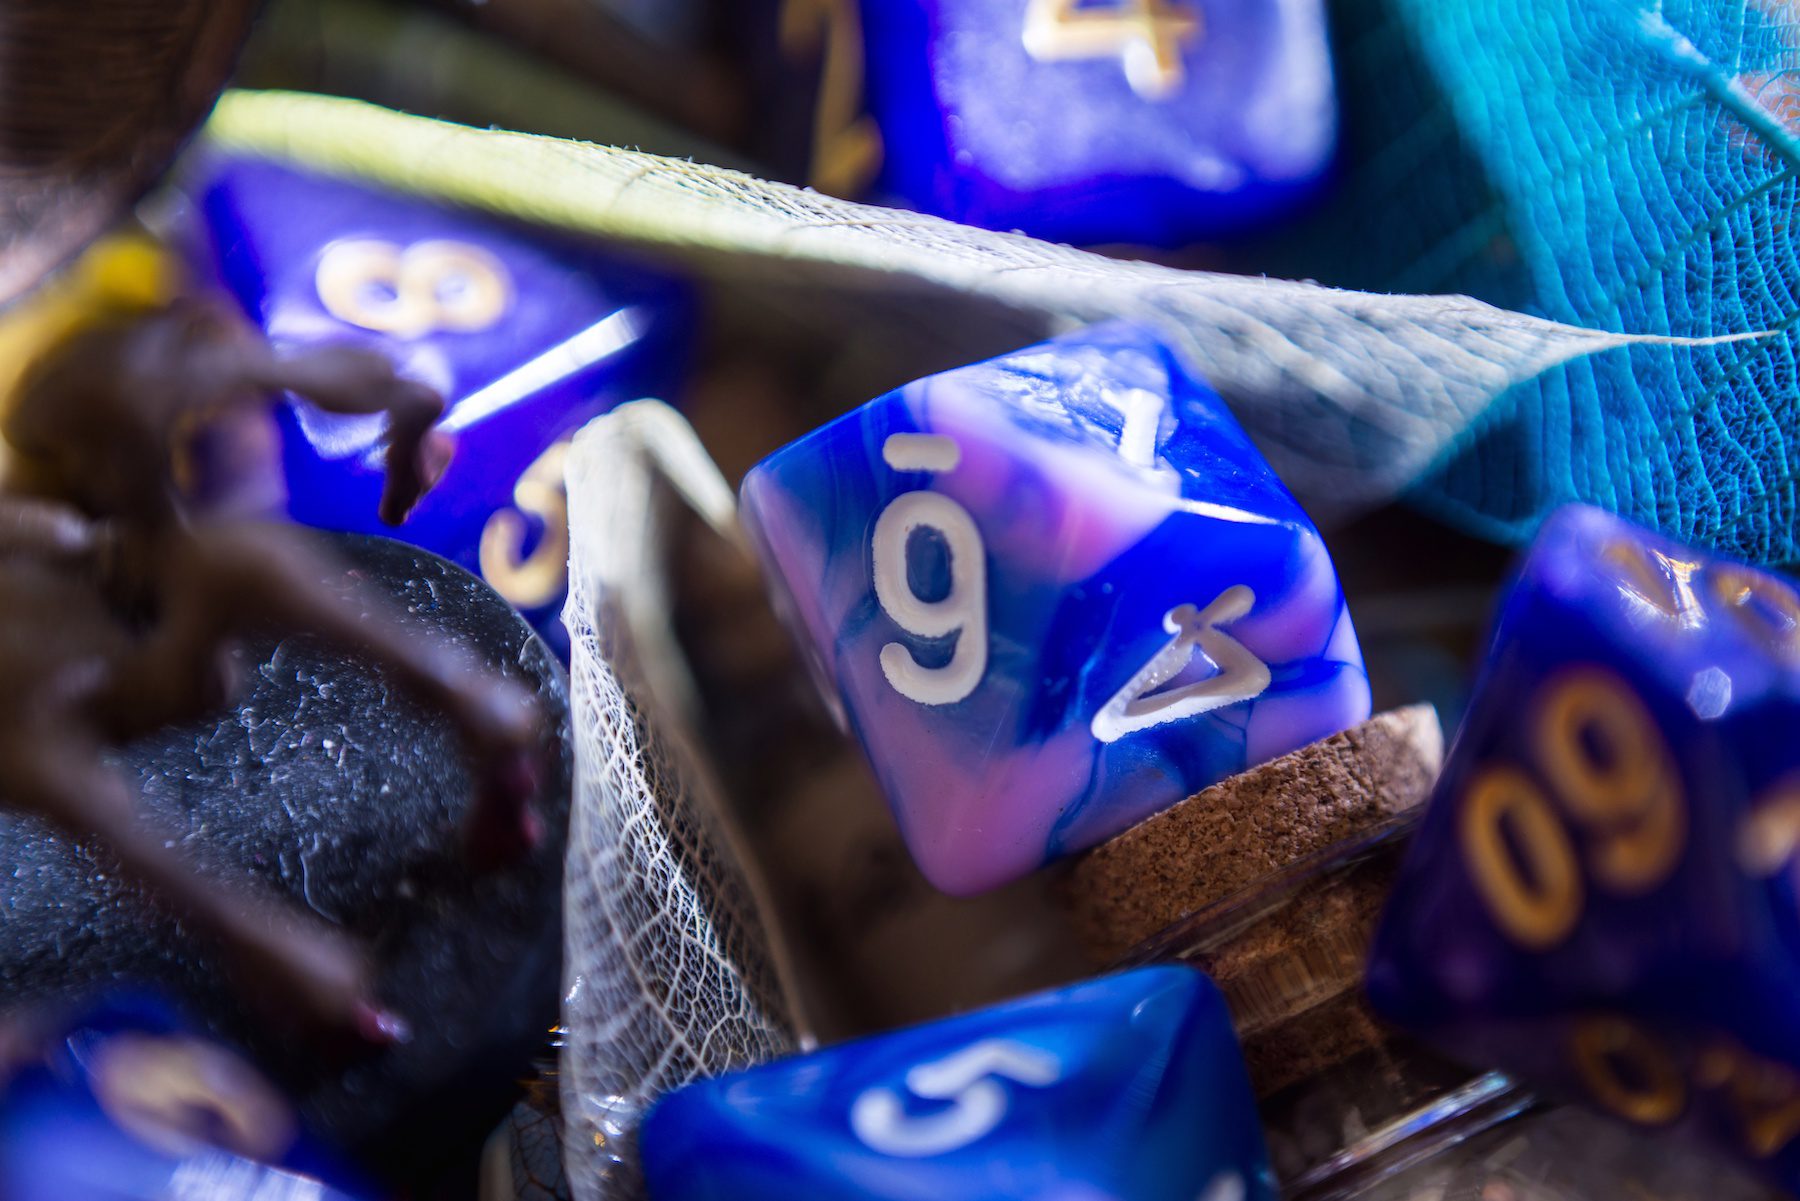 A close-up blurred image of an 8-sided among others dice that is used for the popular dungeons and dragons game